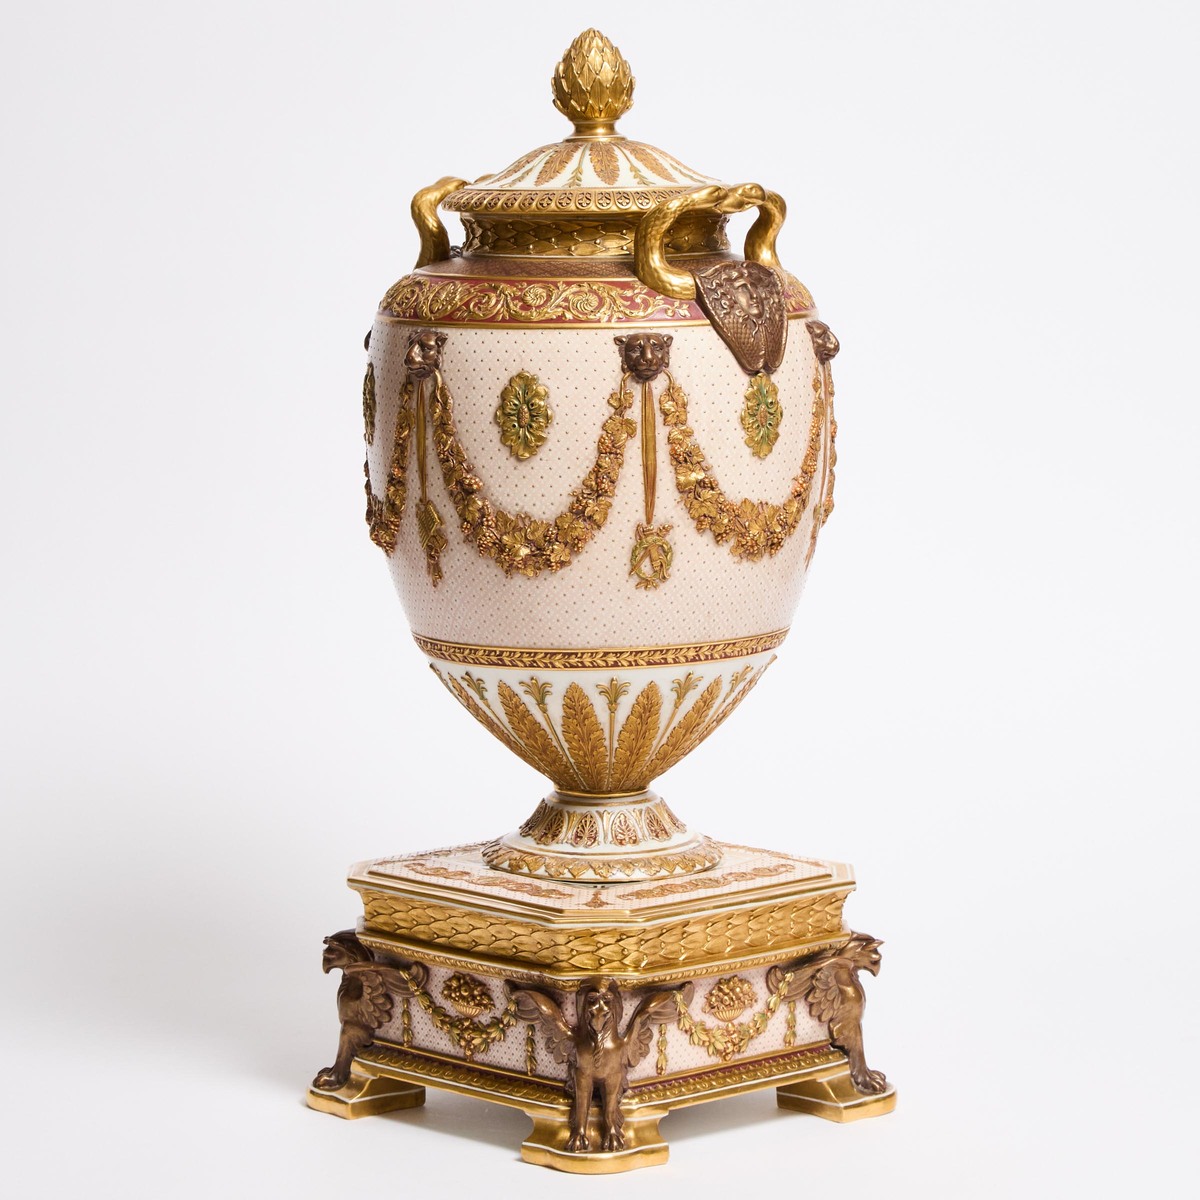 Wedgwood Bronzed and Gilt Victoria Ware Large Covered Urn, c.1900, overall height 37 in — 94 cm - Image 2 of 3